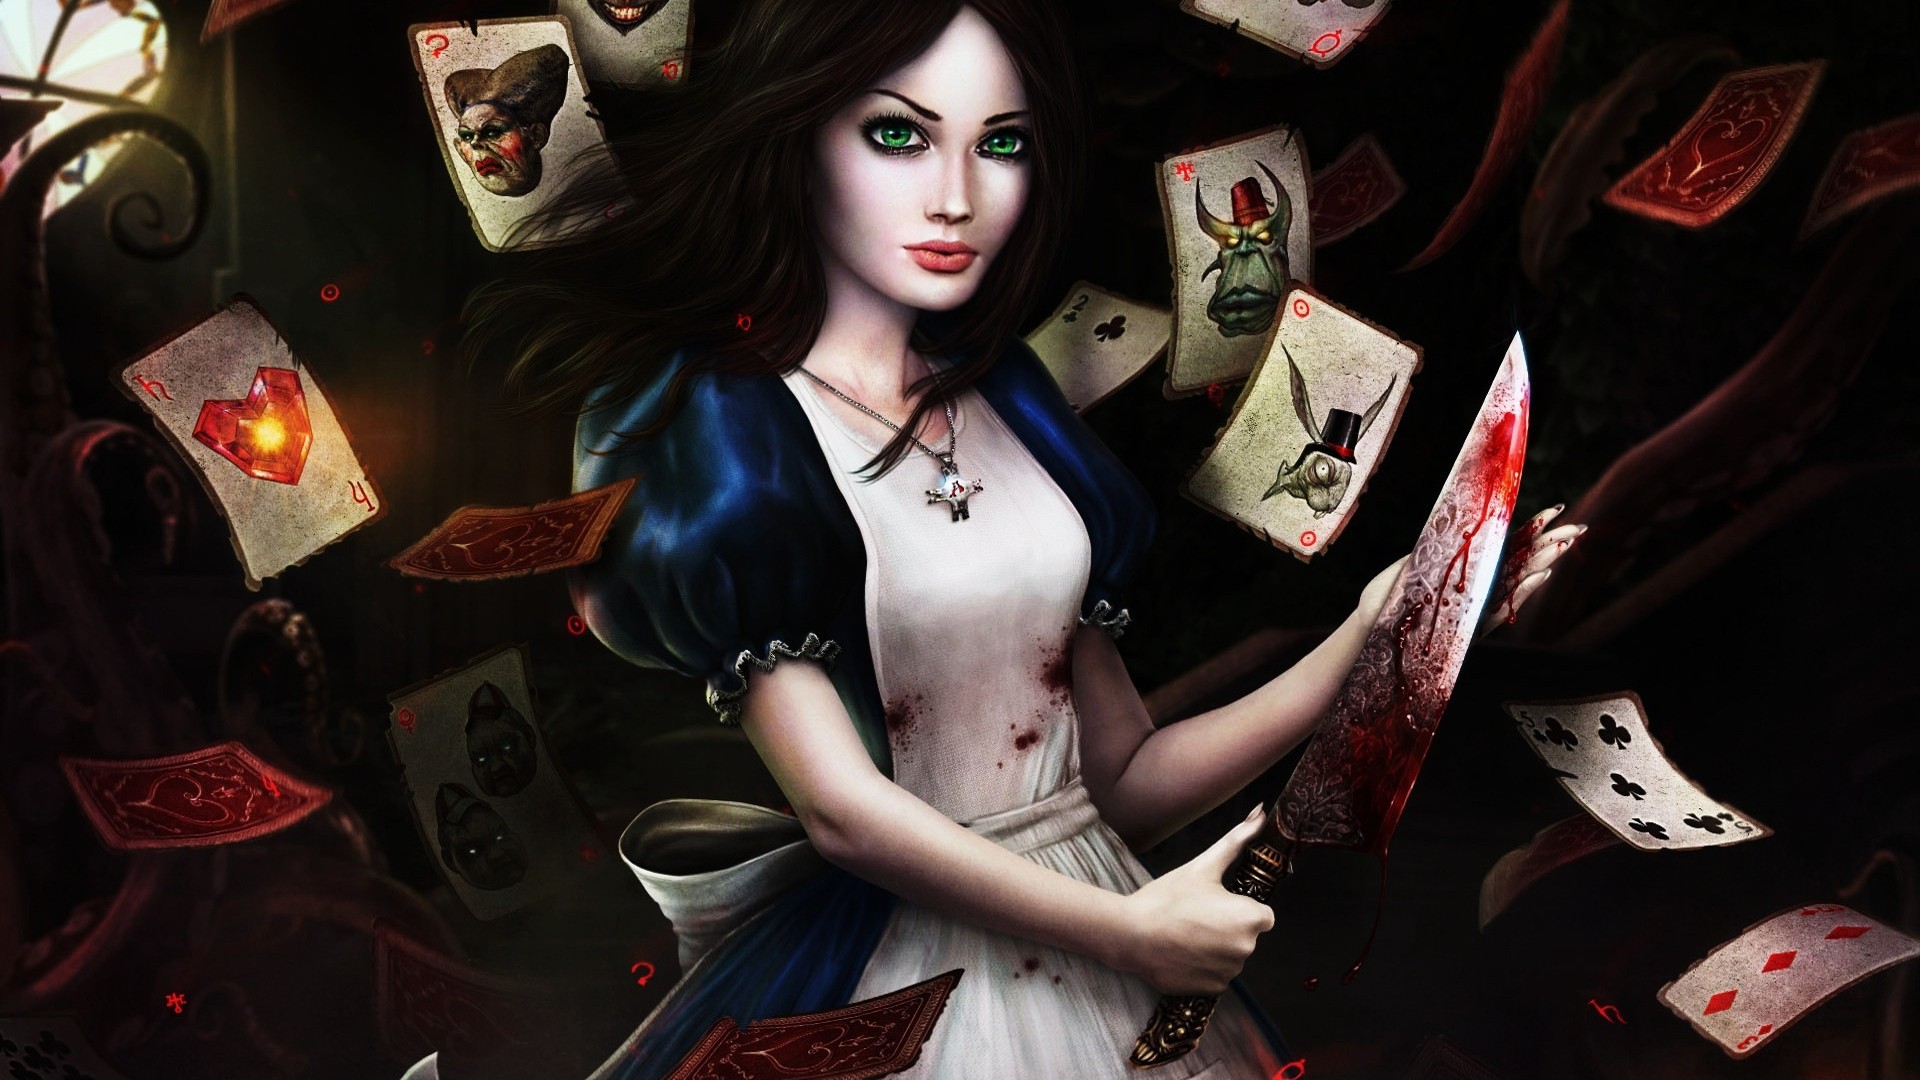 General 1920x1080 Alice in Wonderland Alice: Madness Returns video games PC gaming video game art blood knife green eyes women playing cards